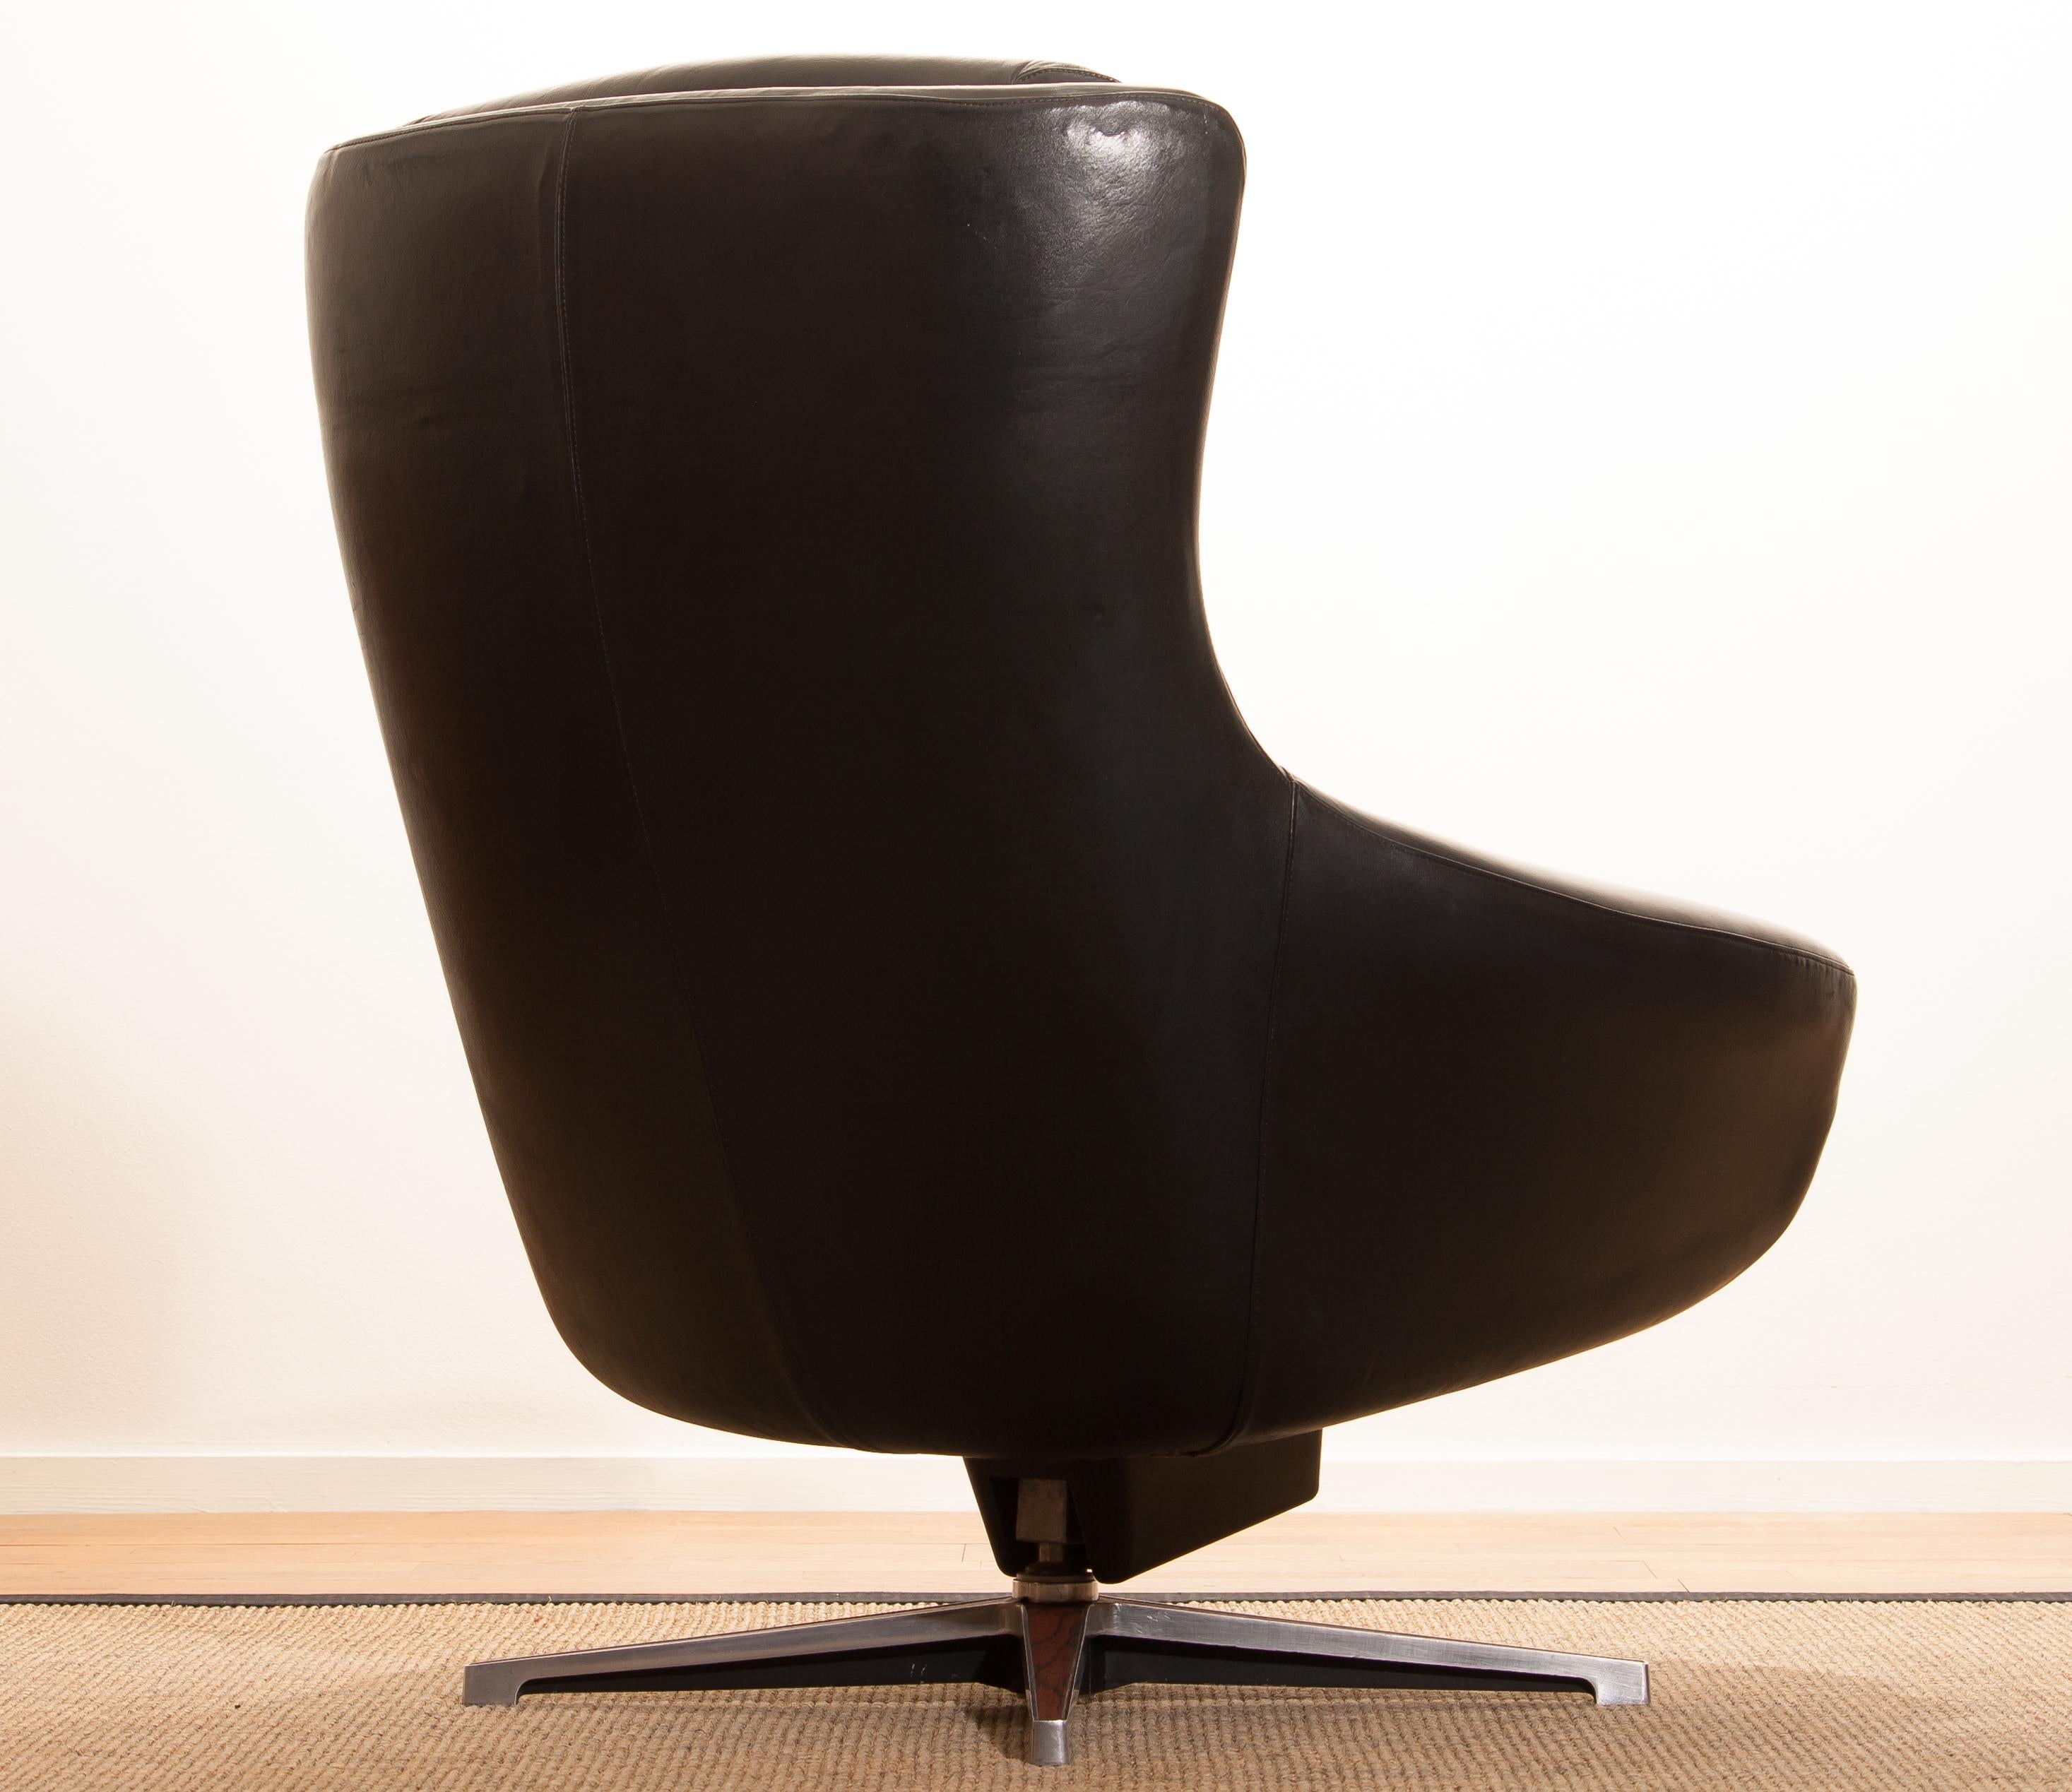 Beautiful swivel lounge chair by Lennart Bender.
This chair is made of a black leather seating on an aluminium/wood print swivel rocking frame.
It is in a very nice condition.
Period 1960s
Dimensions: H 91 cm, W 74 cm, D 70 cm, SH 40 cm.